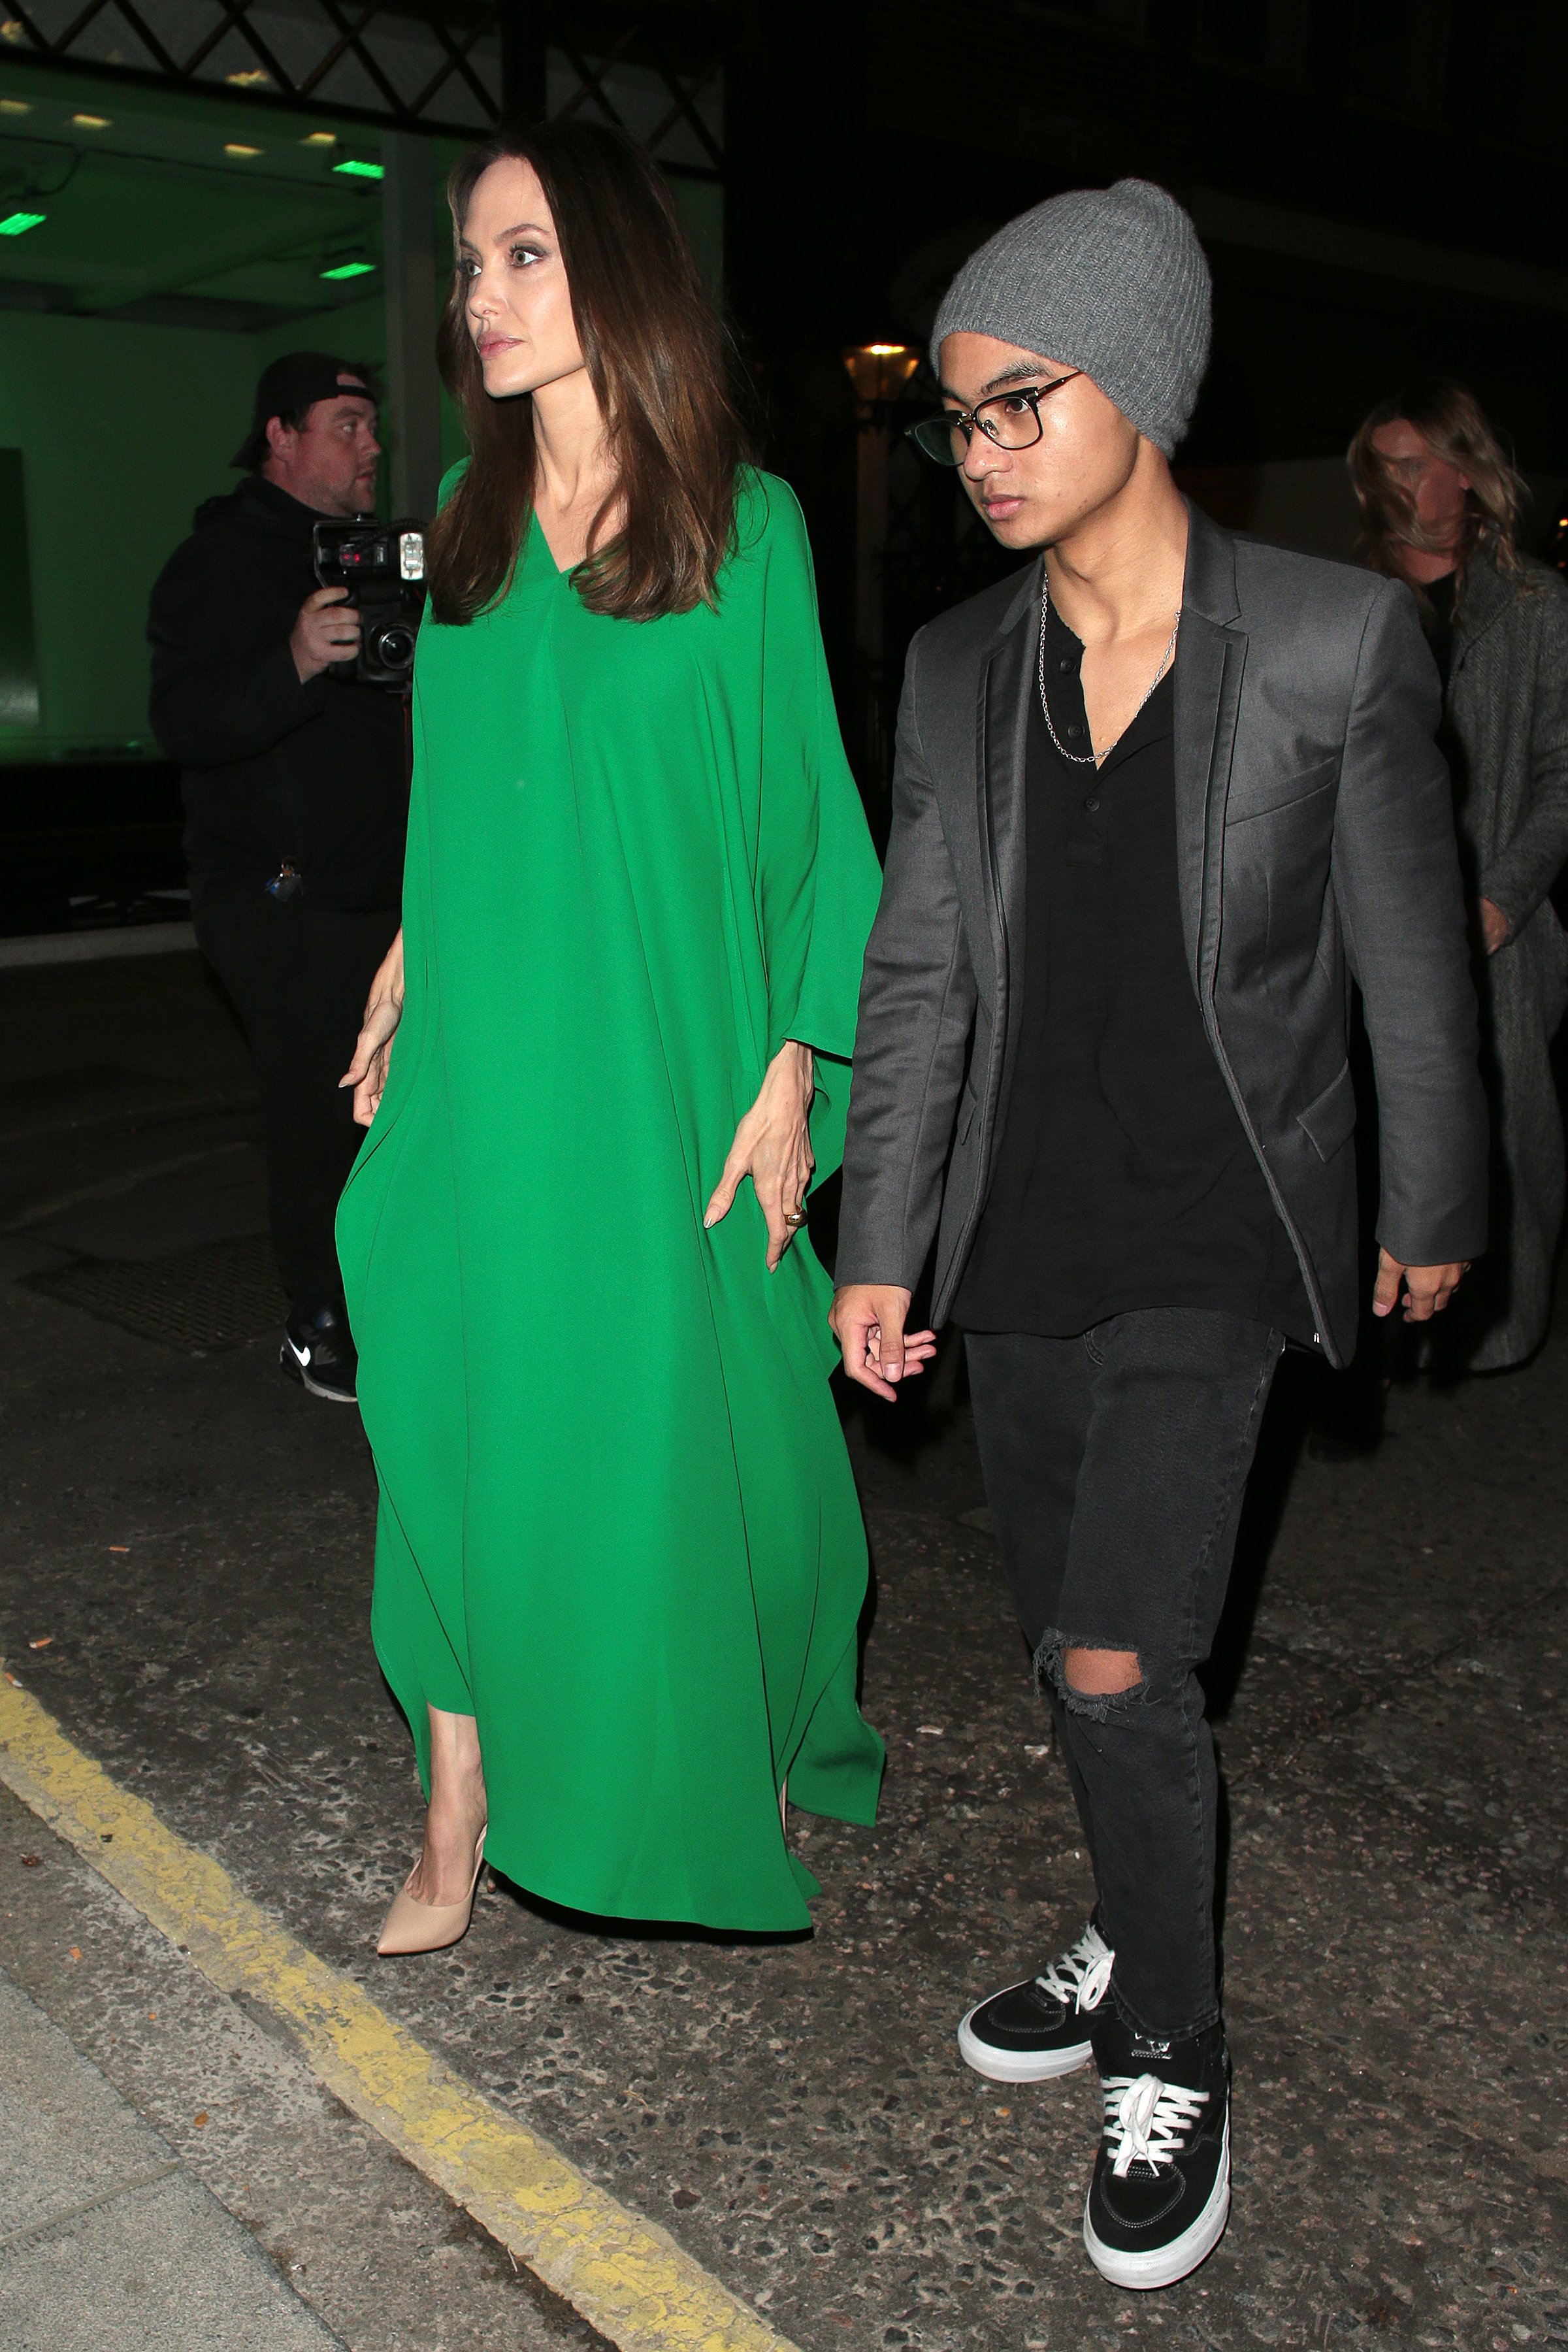 Angelina Jolie and Maddox Chivan Jolie-Pitt seen attending The Eternals - UK film premiere afterparty at Maison Estelle on October 27, 2021 in London, England. | Source: Getty Images